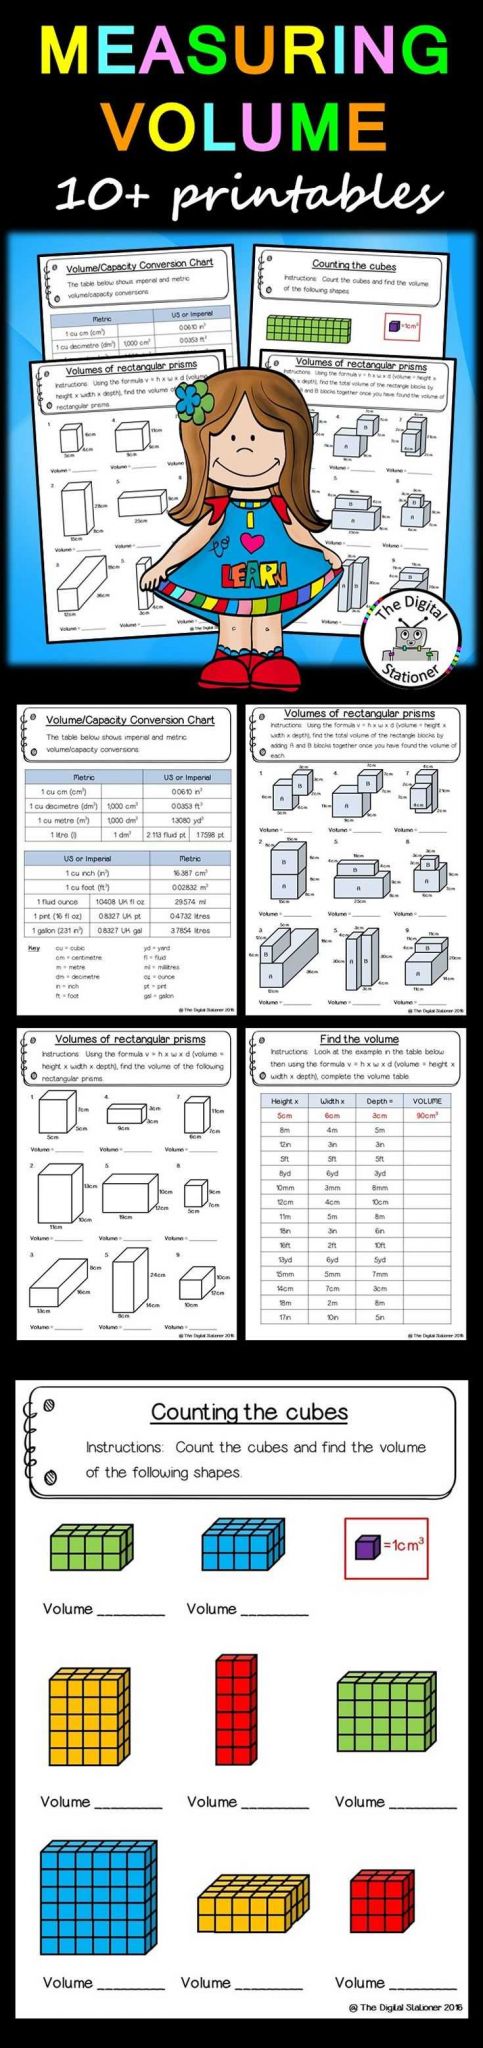 Surface area Of Prisms and Cylinders Worksheet Answers together with 55 Best My Tpt Maths Resources Images On Pinterest